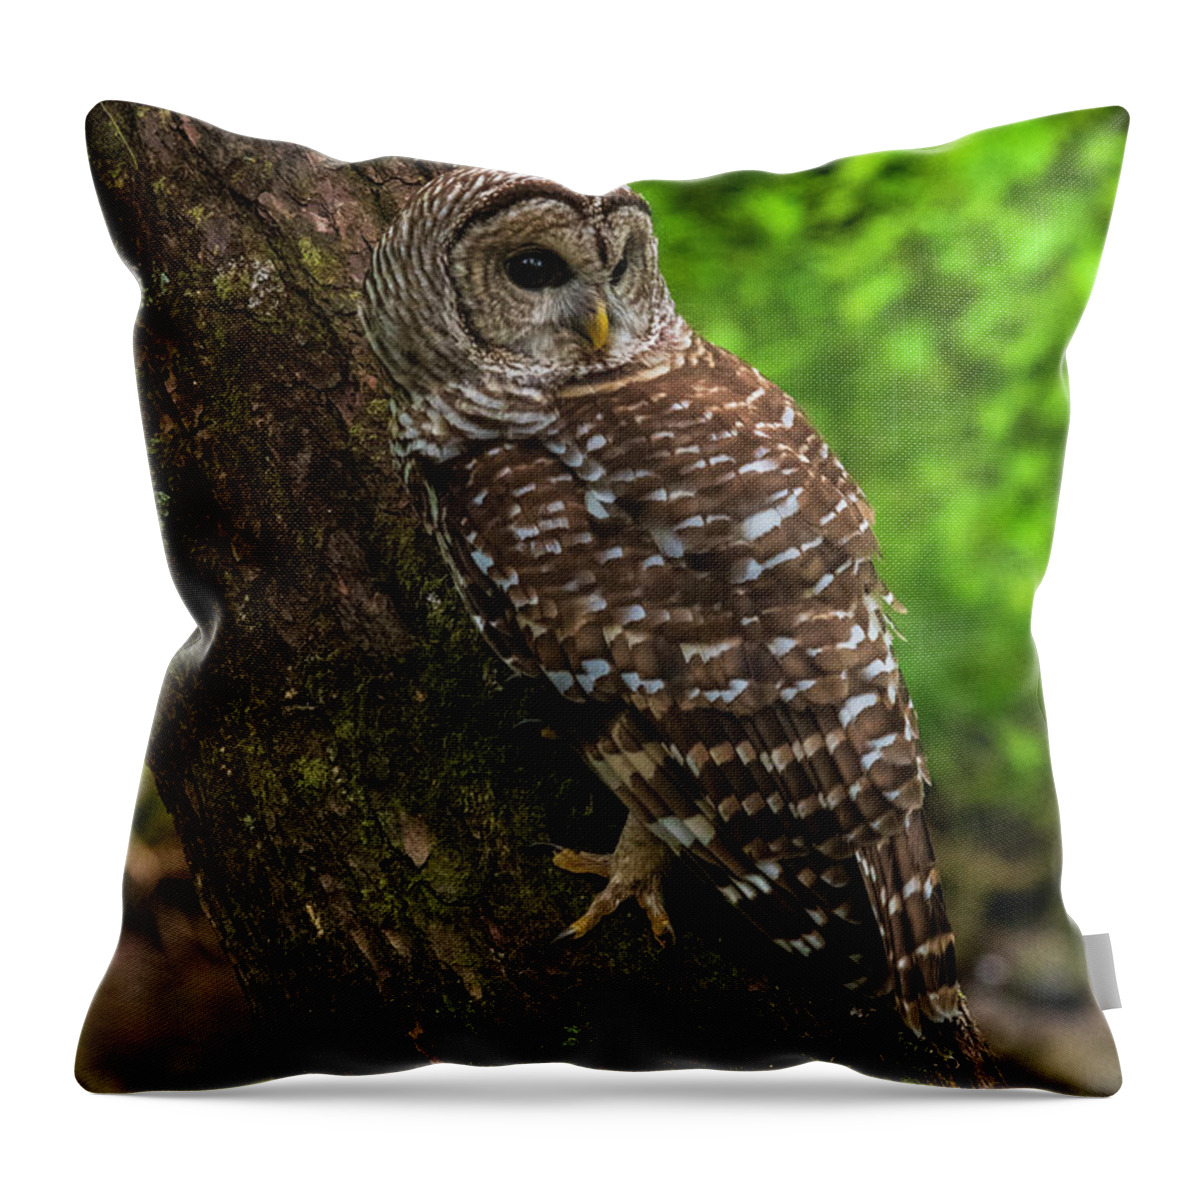 Great Smoky Mountains National Park Throw Pillow featuring the photograph Barred Owl 2 by Melissa Southern